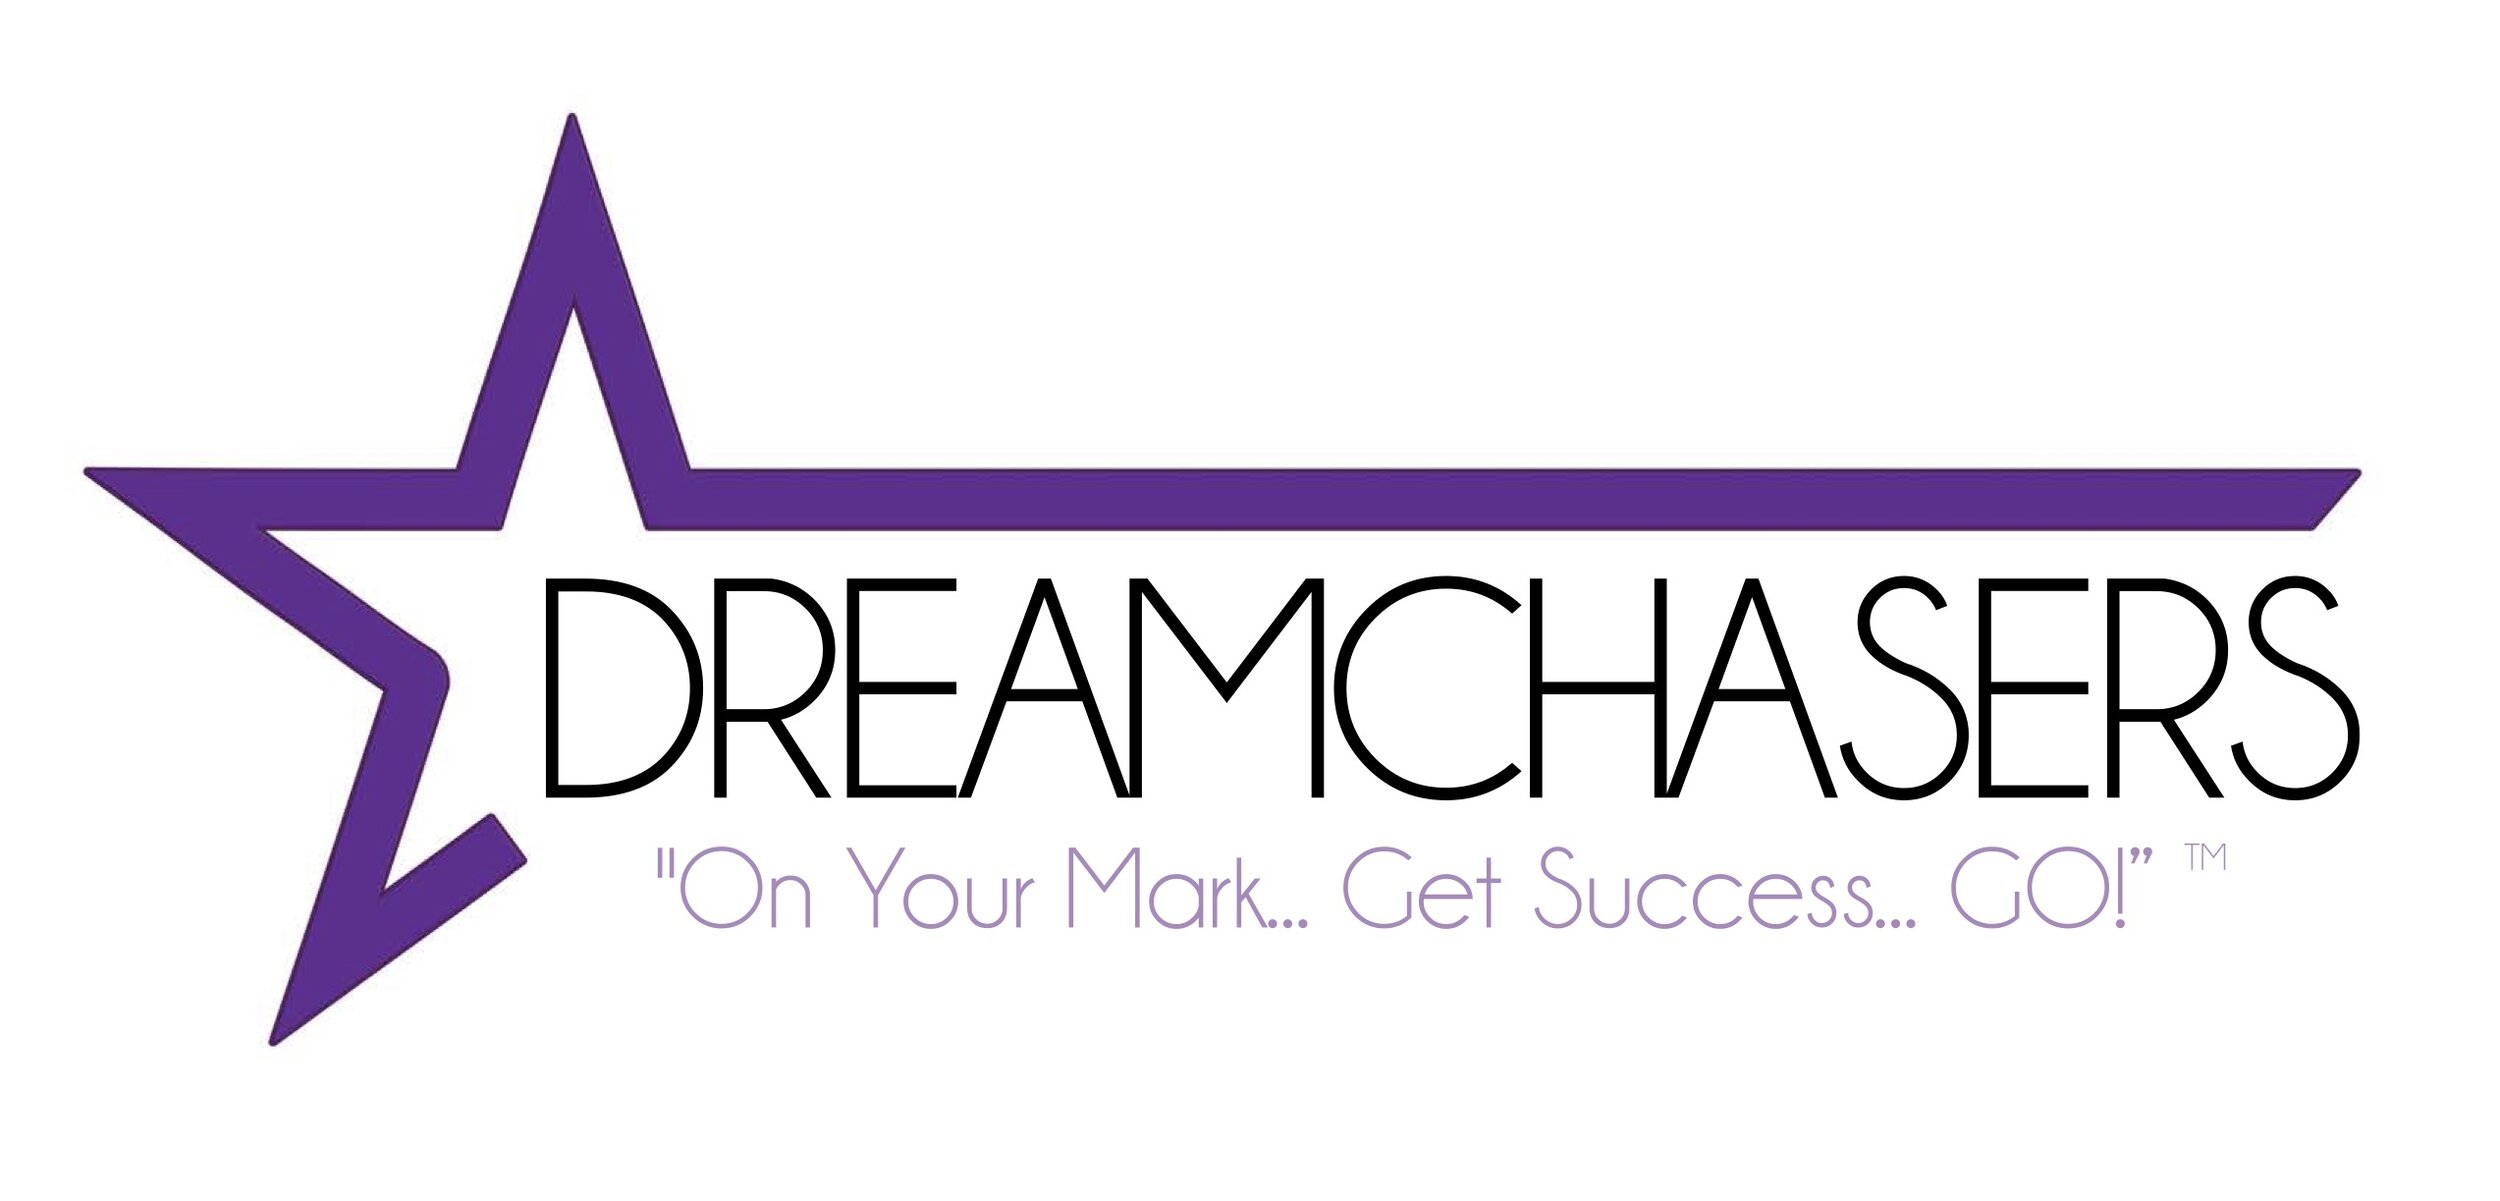 final updated DreamChasers logo.jpeg